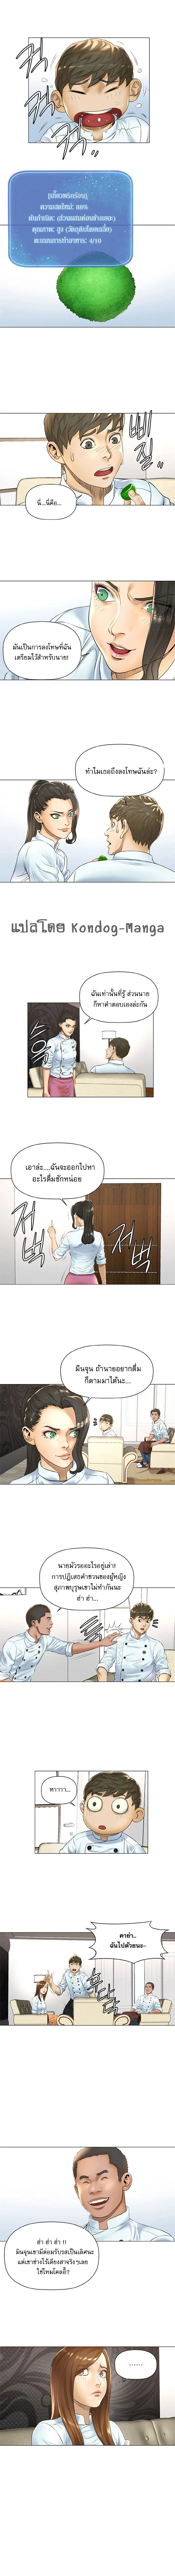 God of Cooking 14 (4)